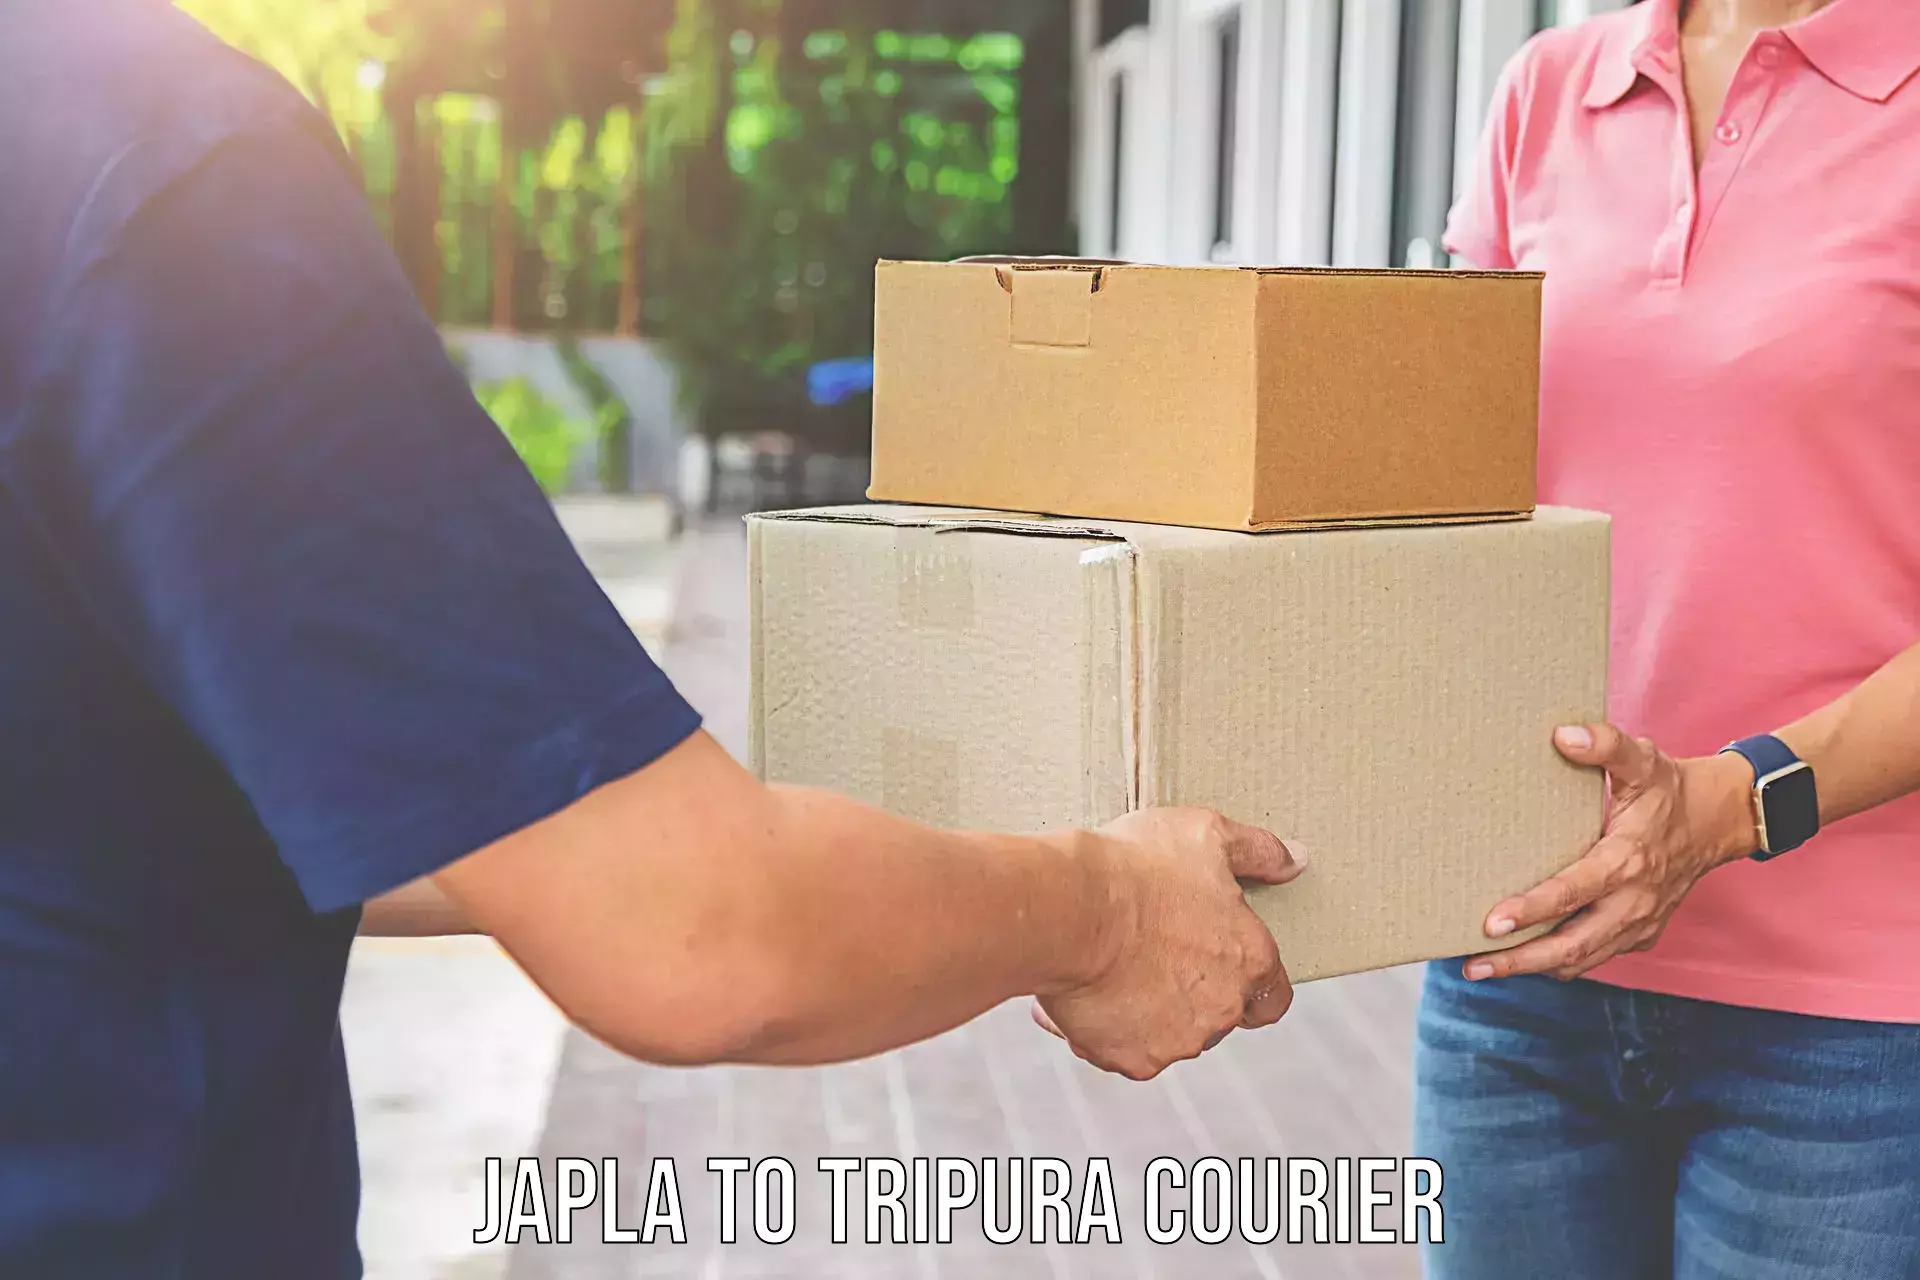 Furniture delivery service Japla to Aambasa